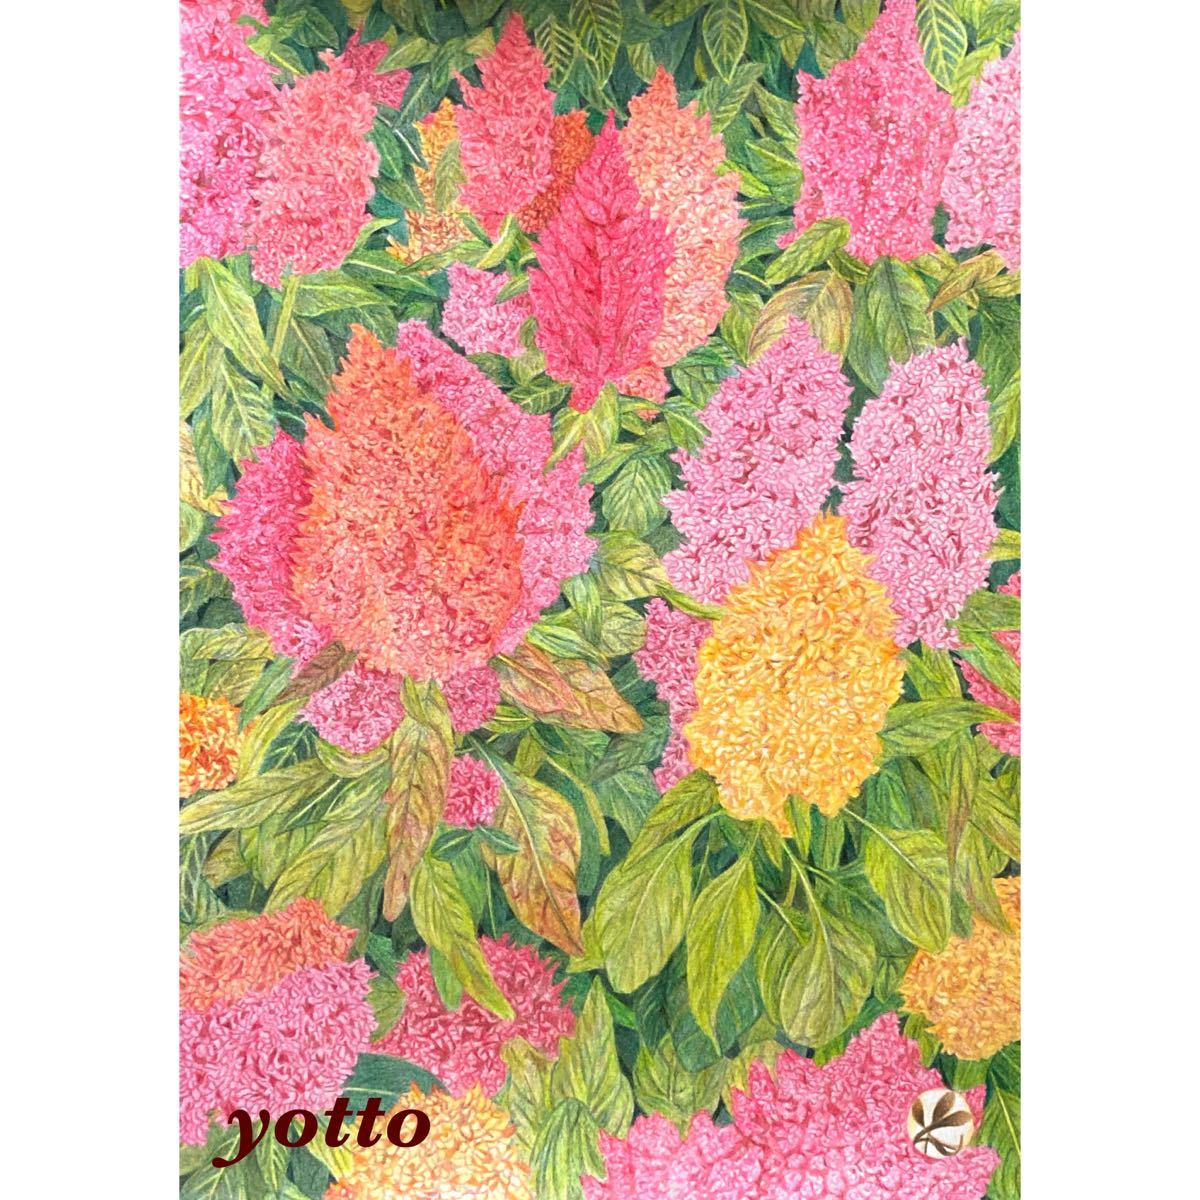 Colored pencil drawing Celosia A4 with frame◇◆Hand-drawn◇Original drawing◆Flowers◇◆Yotto, artwork, painting, pencil drawing, charcoal drawing